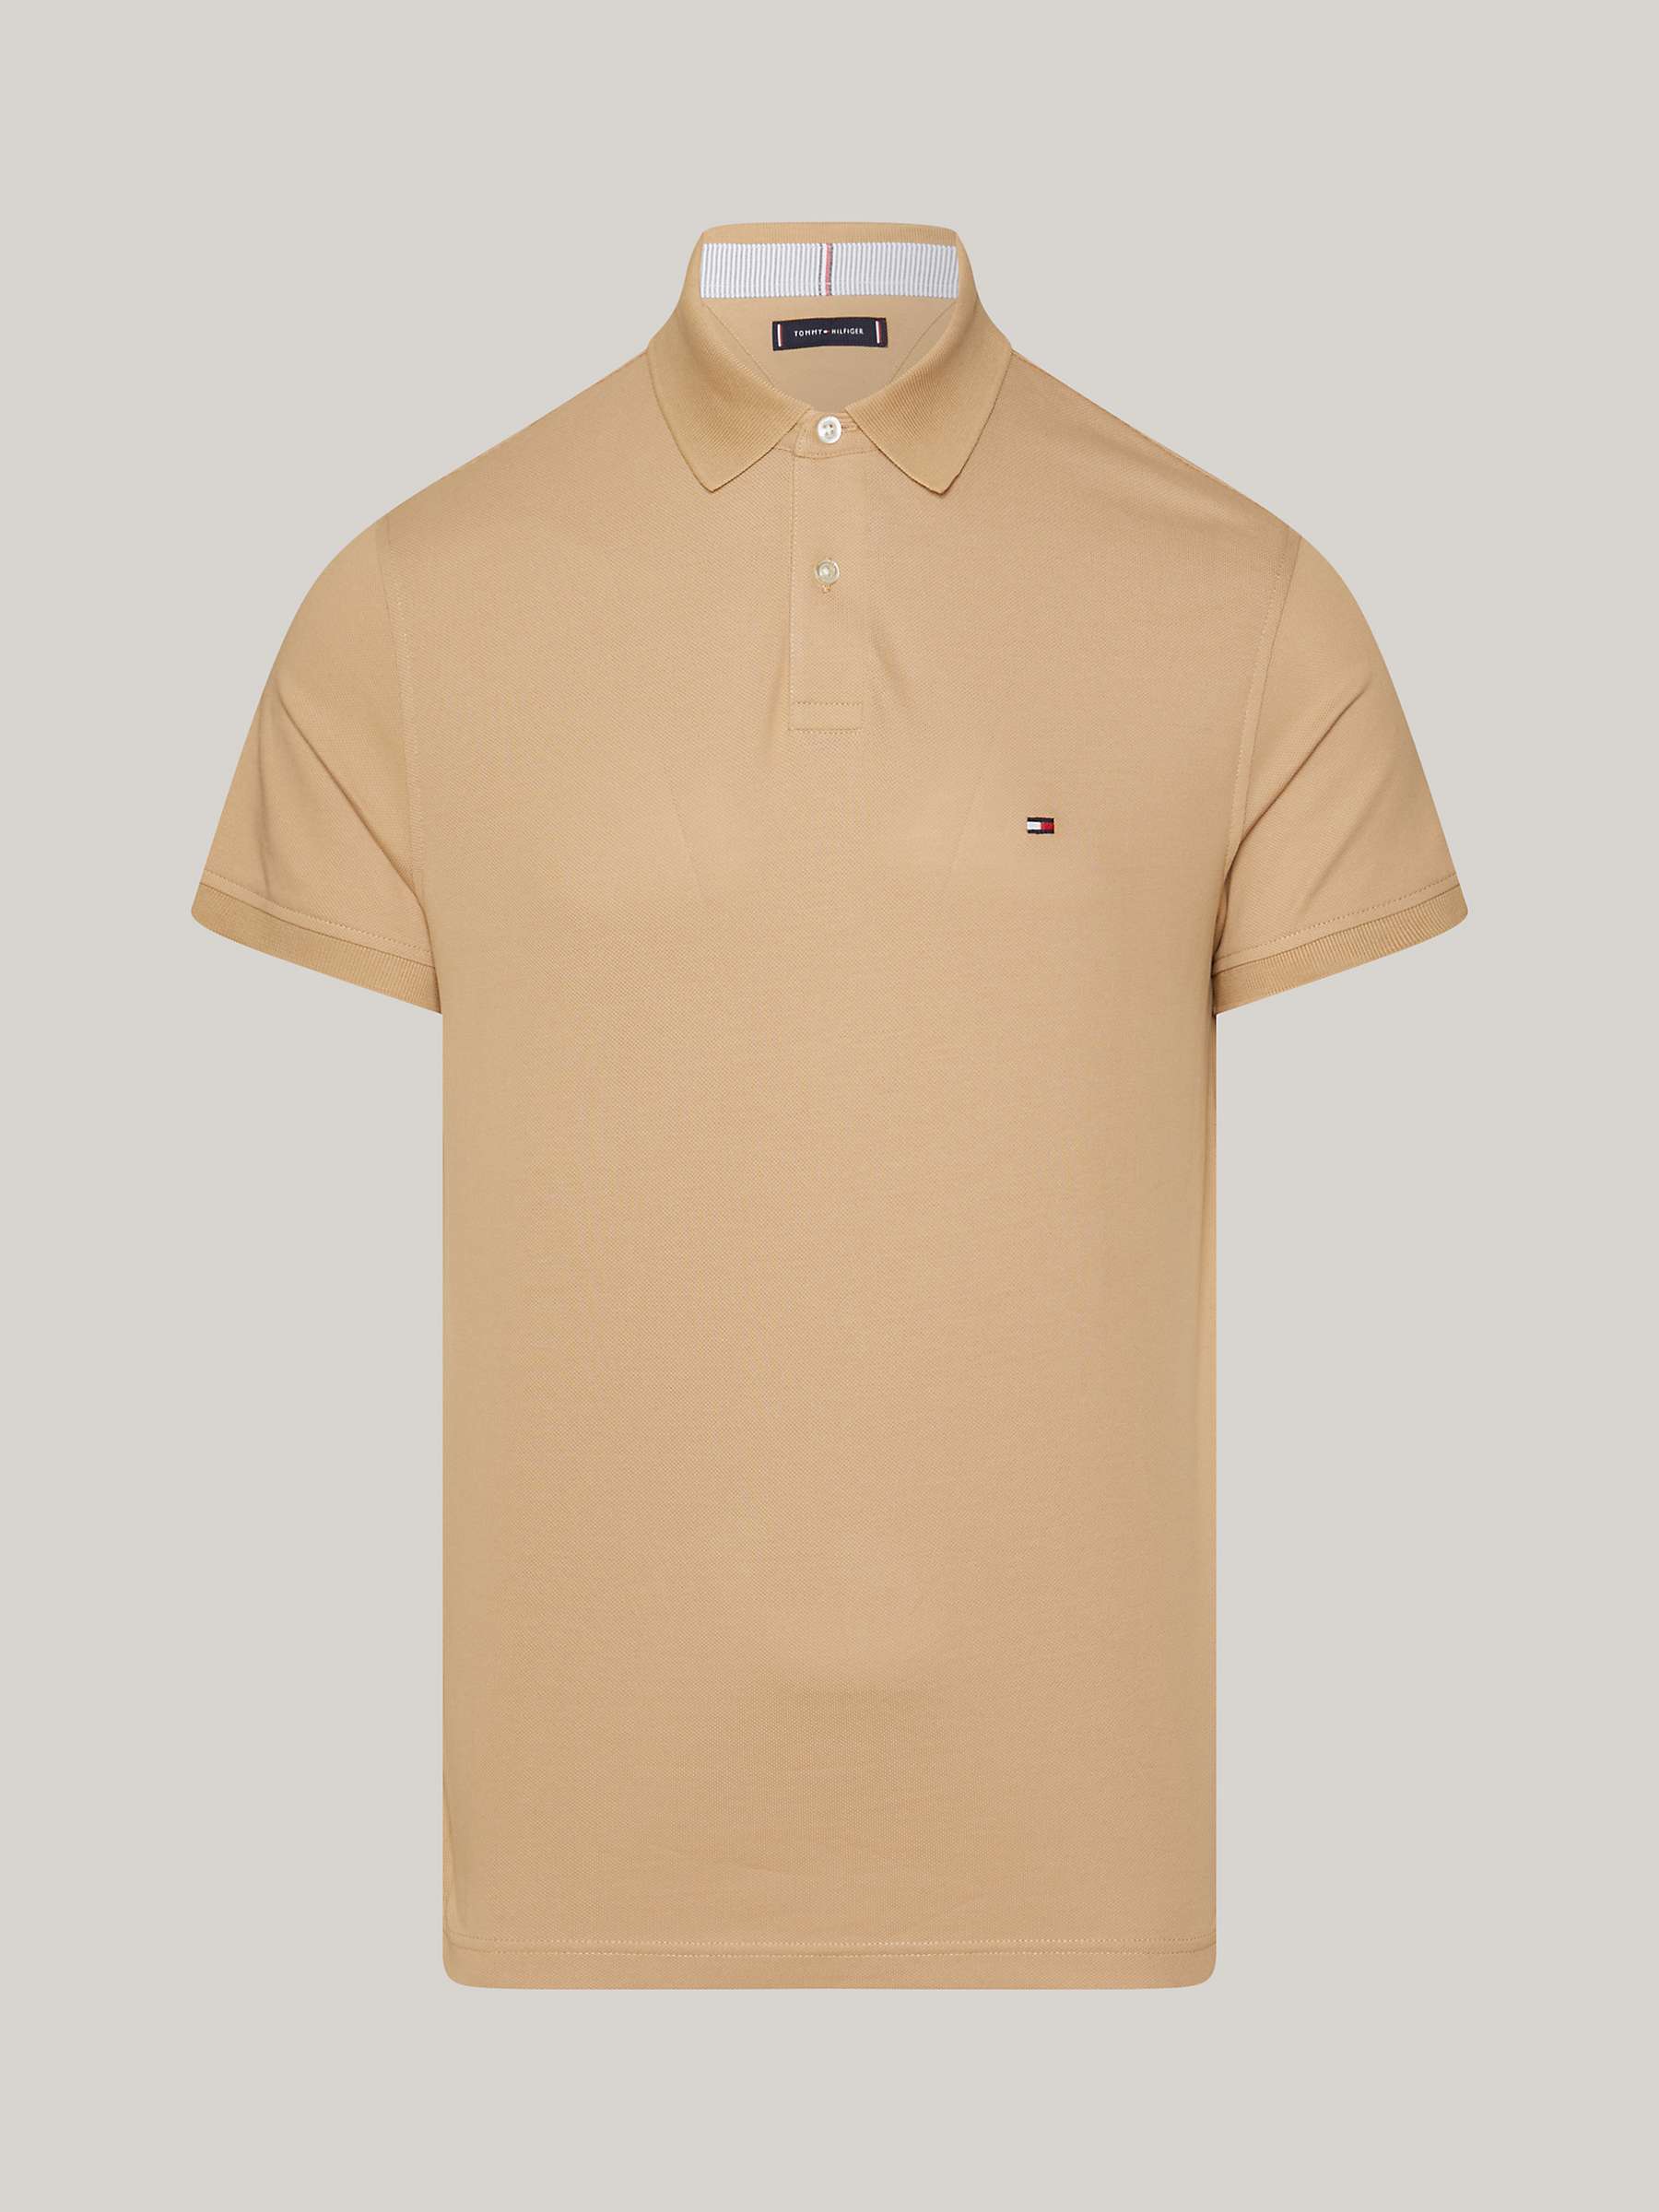 Buy Tommy Hilfiger 1985 Classic Short Sleeve Polo Shirt Online at johnlewis.com